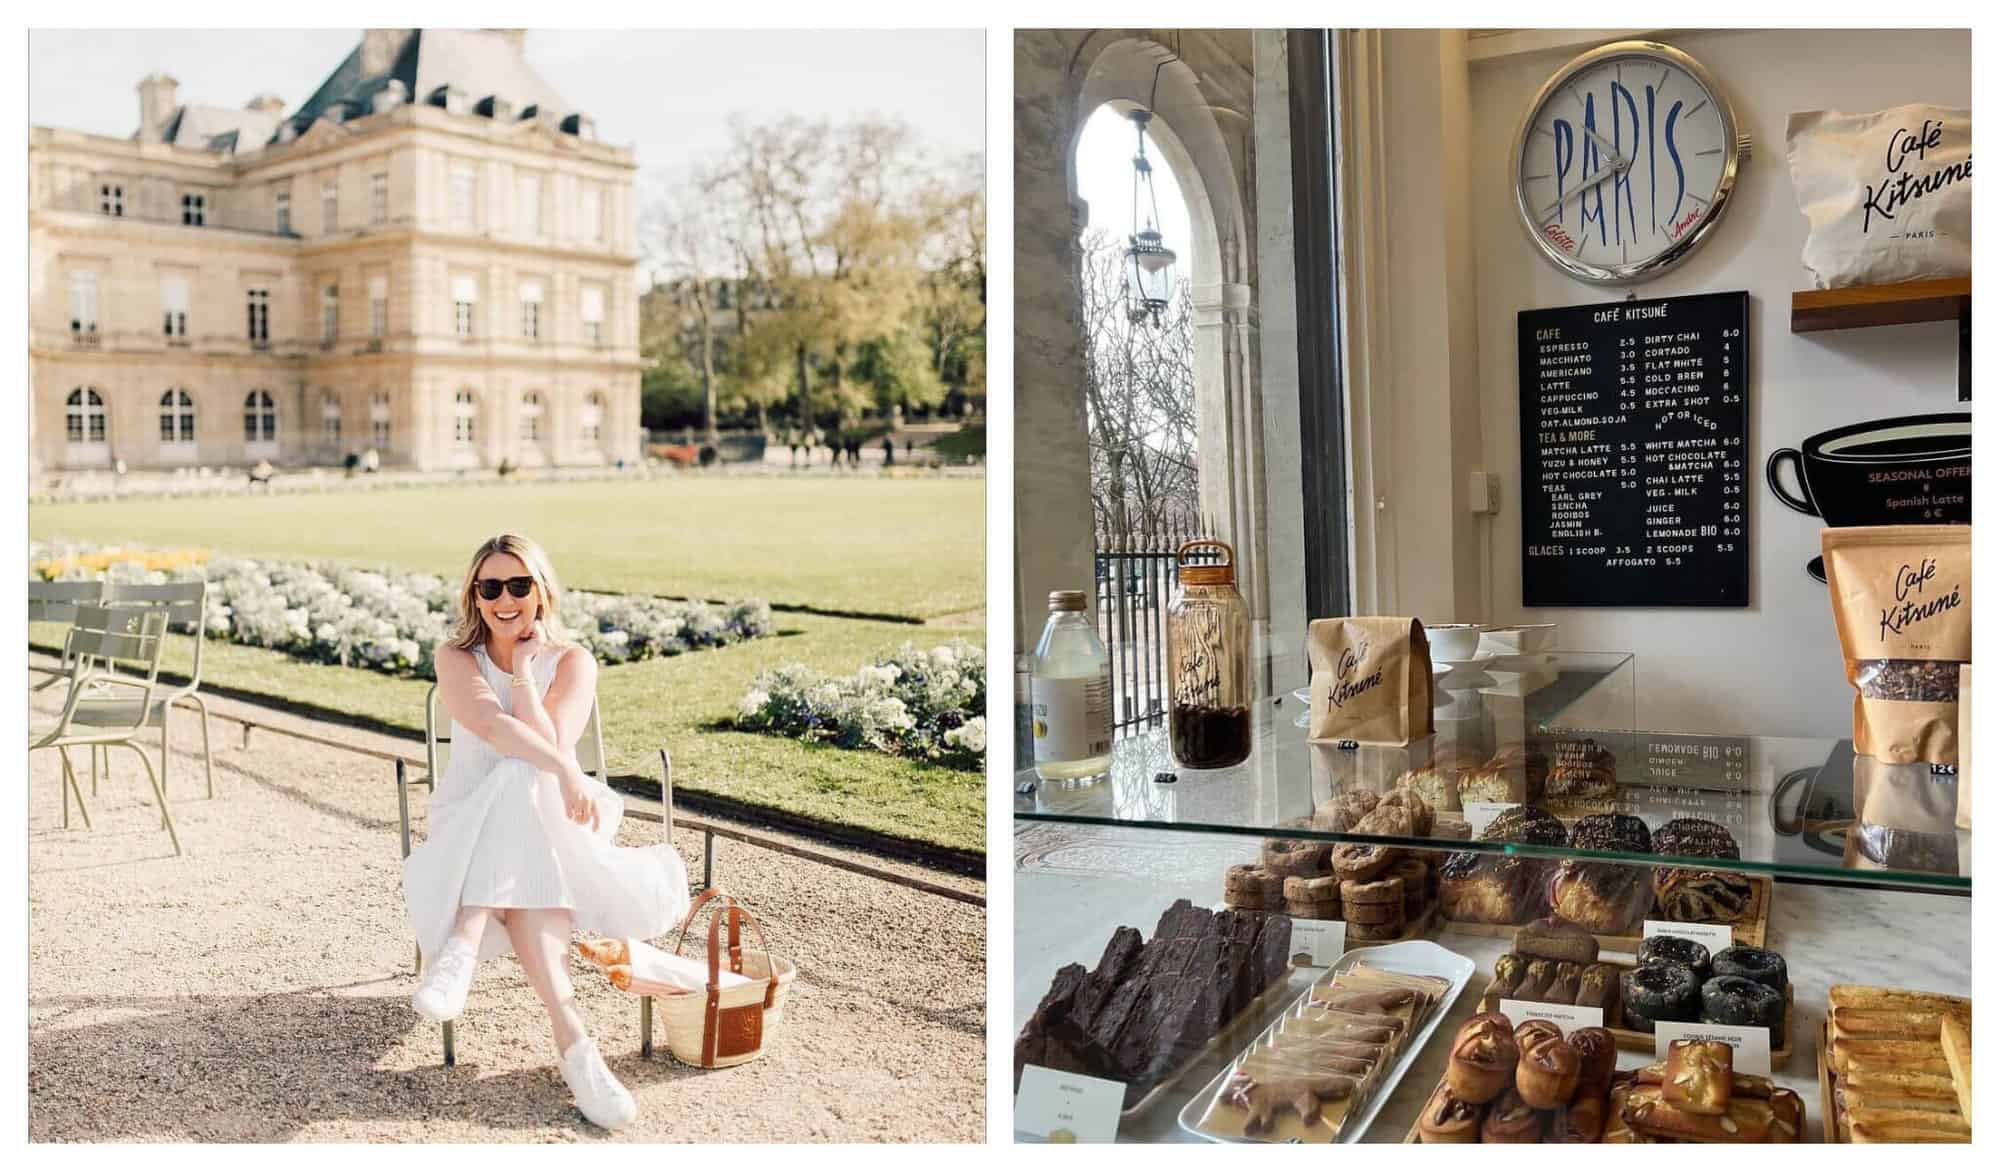 (Left) A woman with a white dress and a picnic basket sits on a green chair in a park where a beige building and green pastures are seen in the background. / (Right) Pastries and coffee on showcase inside of a coffeeshop. 